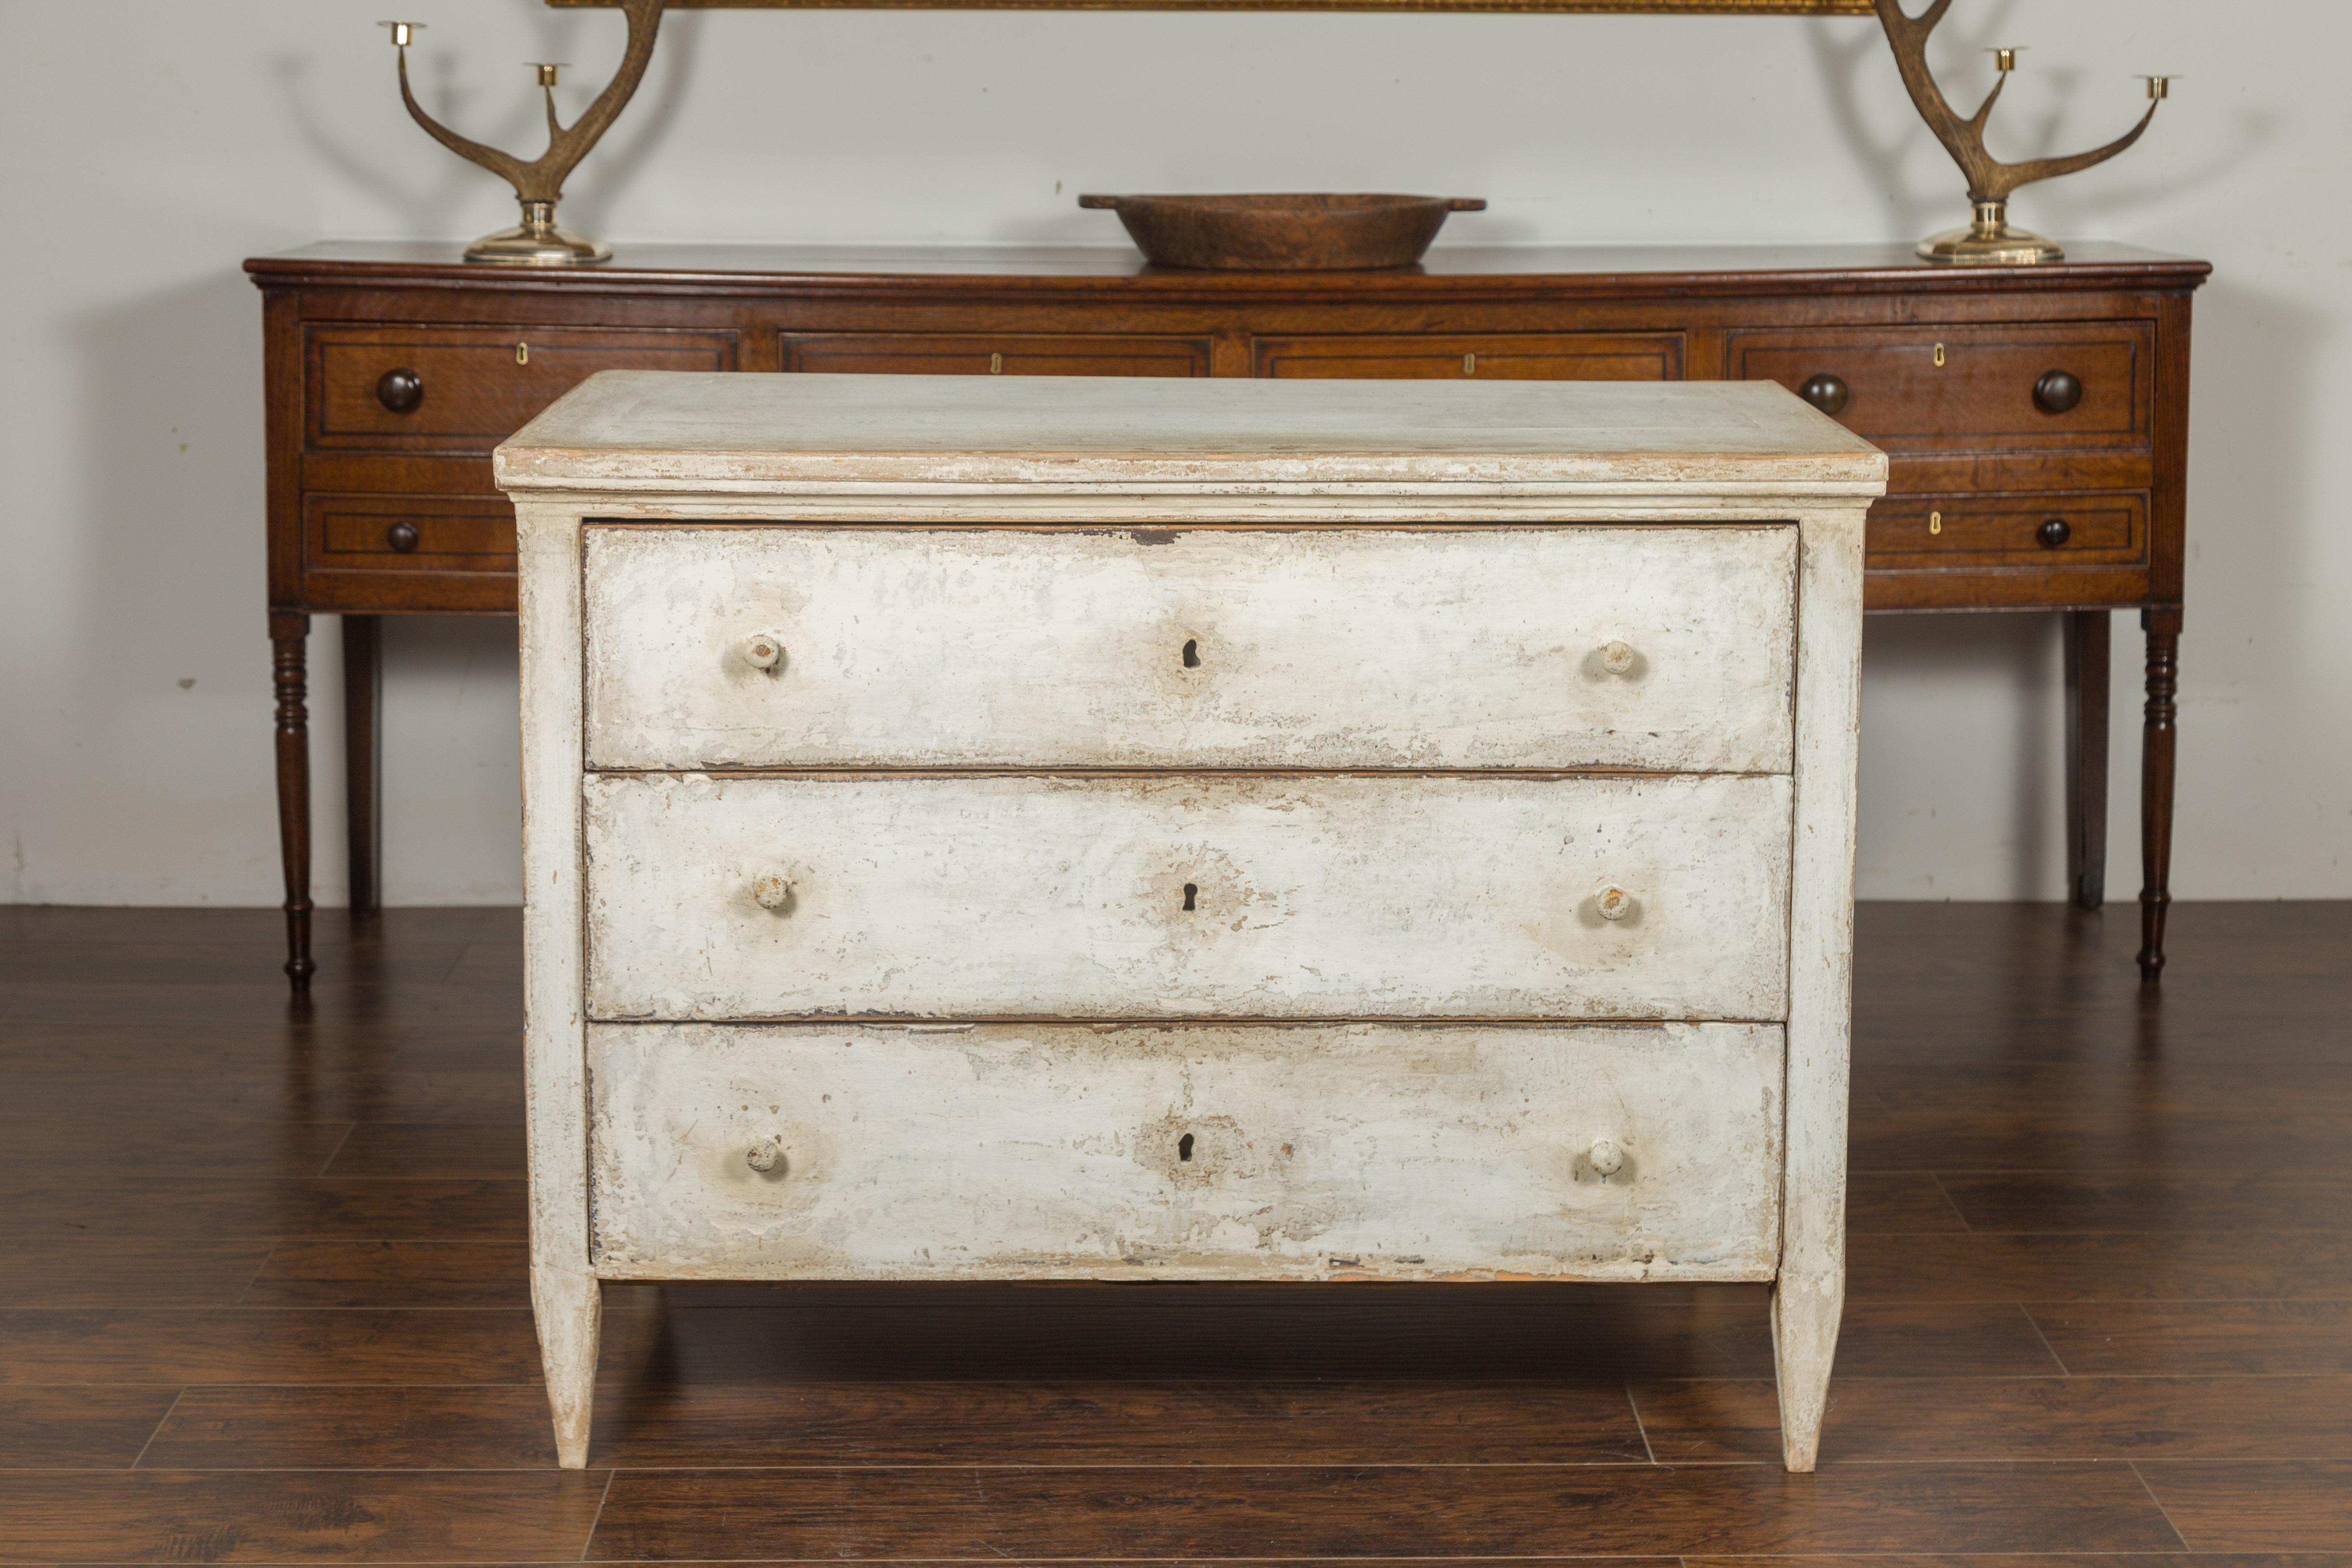 A French painted wood three-drawer chest with tapered feet and distressed patina. Created in France during the last quarter of the 19th century, this chest charms us with its simple lines and weathered finish. A rectangular top sits above three